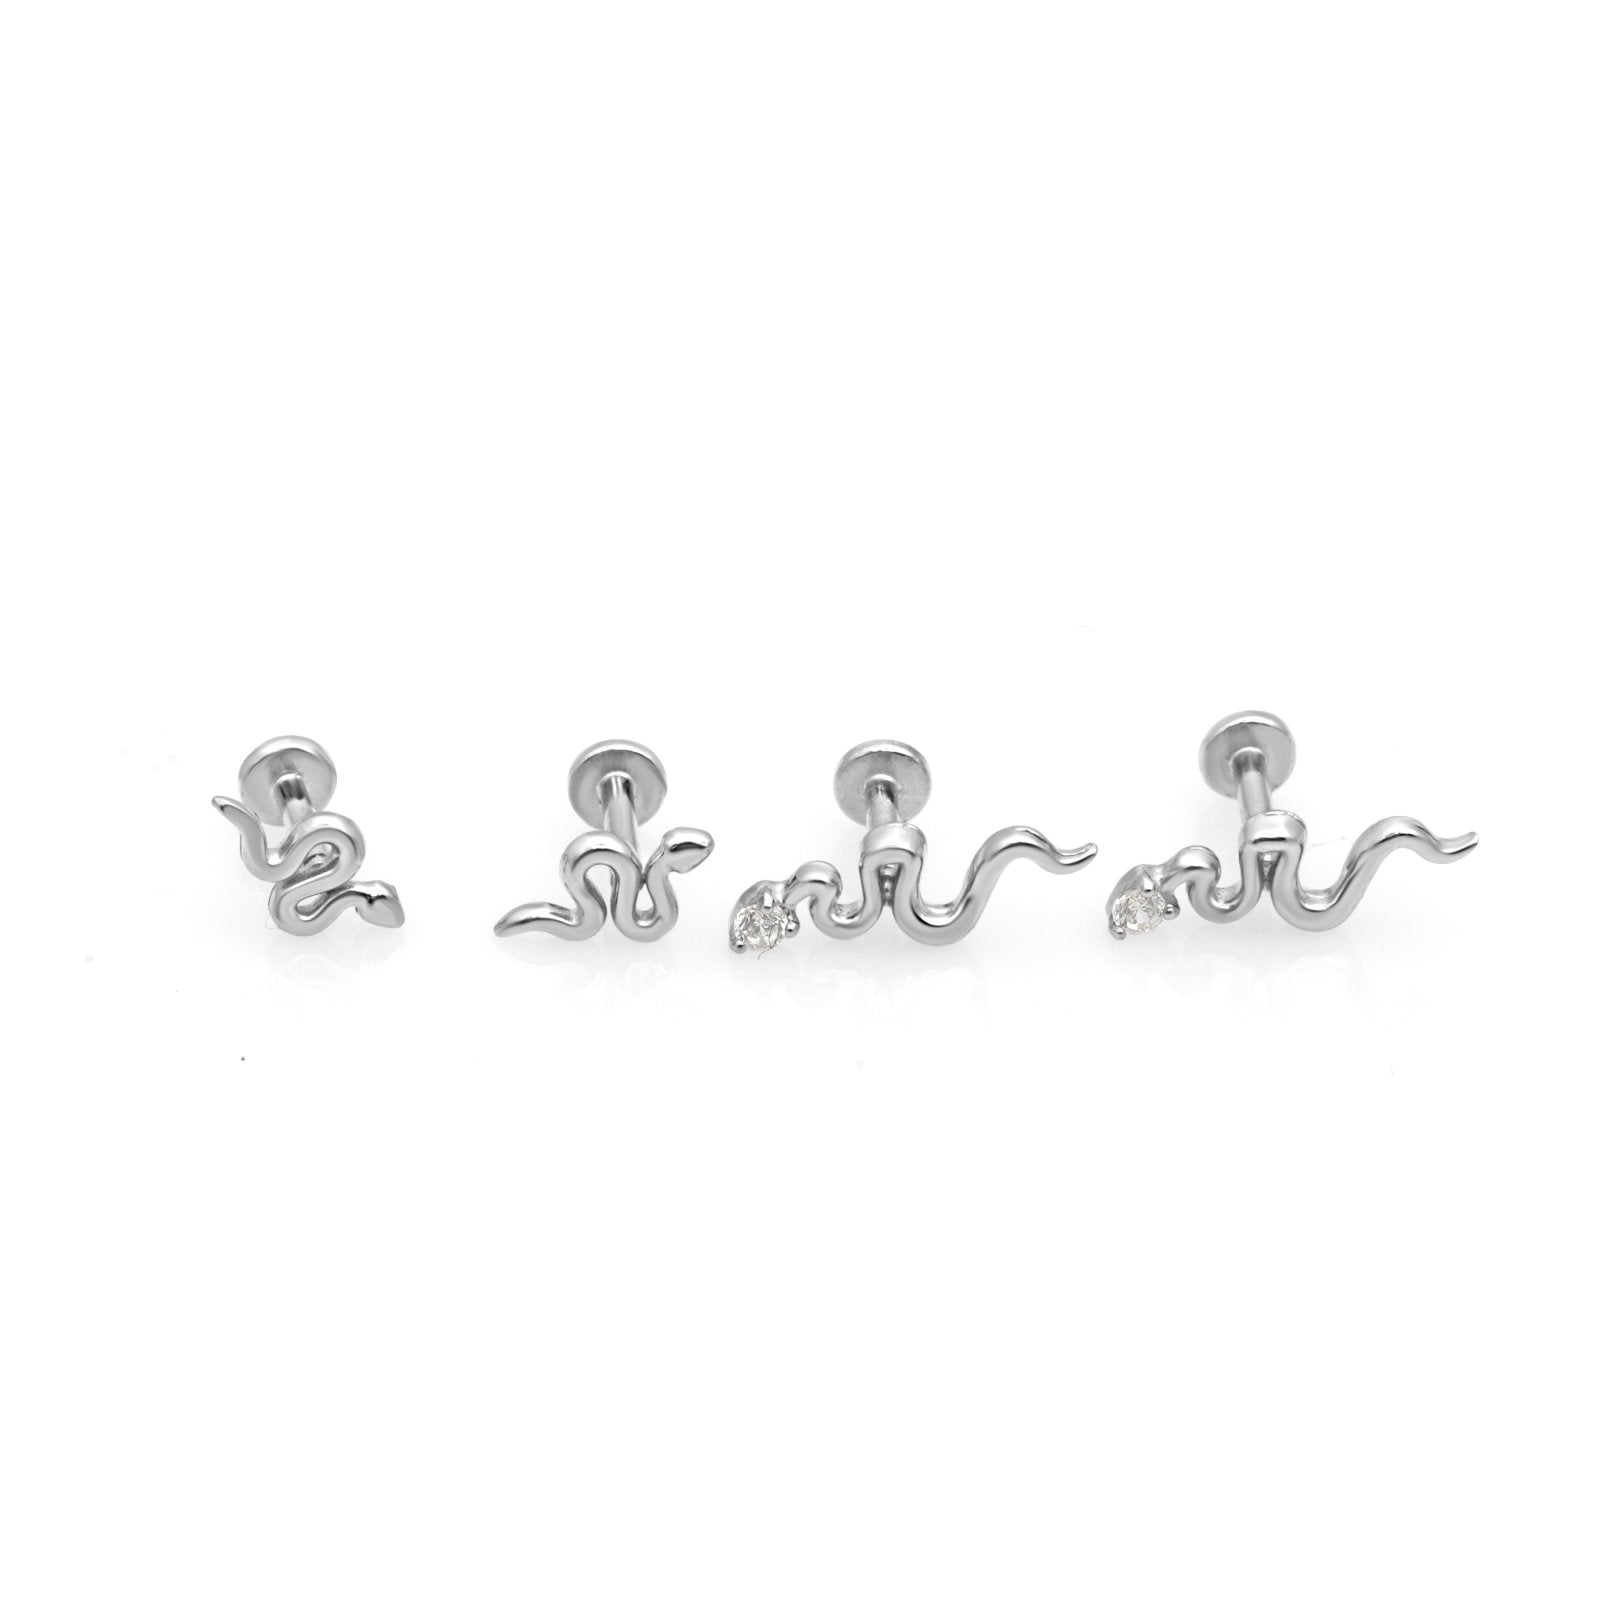 Snake Flat Back Earring with Stone Earrings Estella Collection #product_description# 18330 14k Cartilage Earring Cartilage Earrings #tag4# #tag5# #tag6# #tag7# #tag8# #tag9# #tag10# 5MM